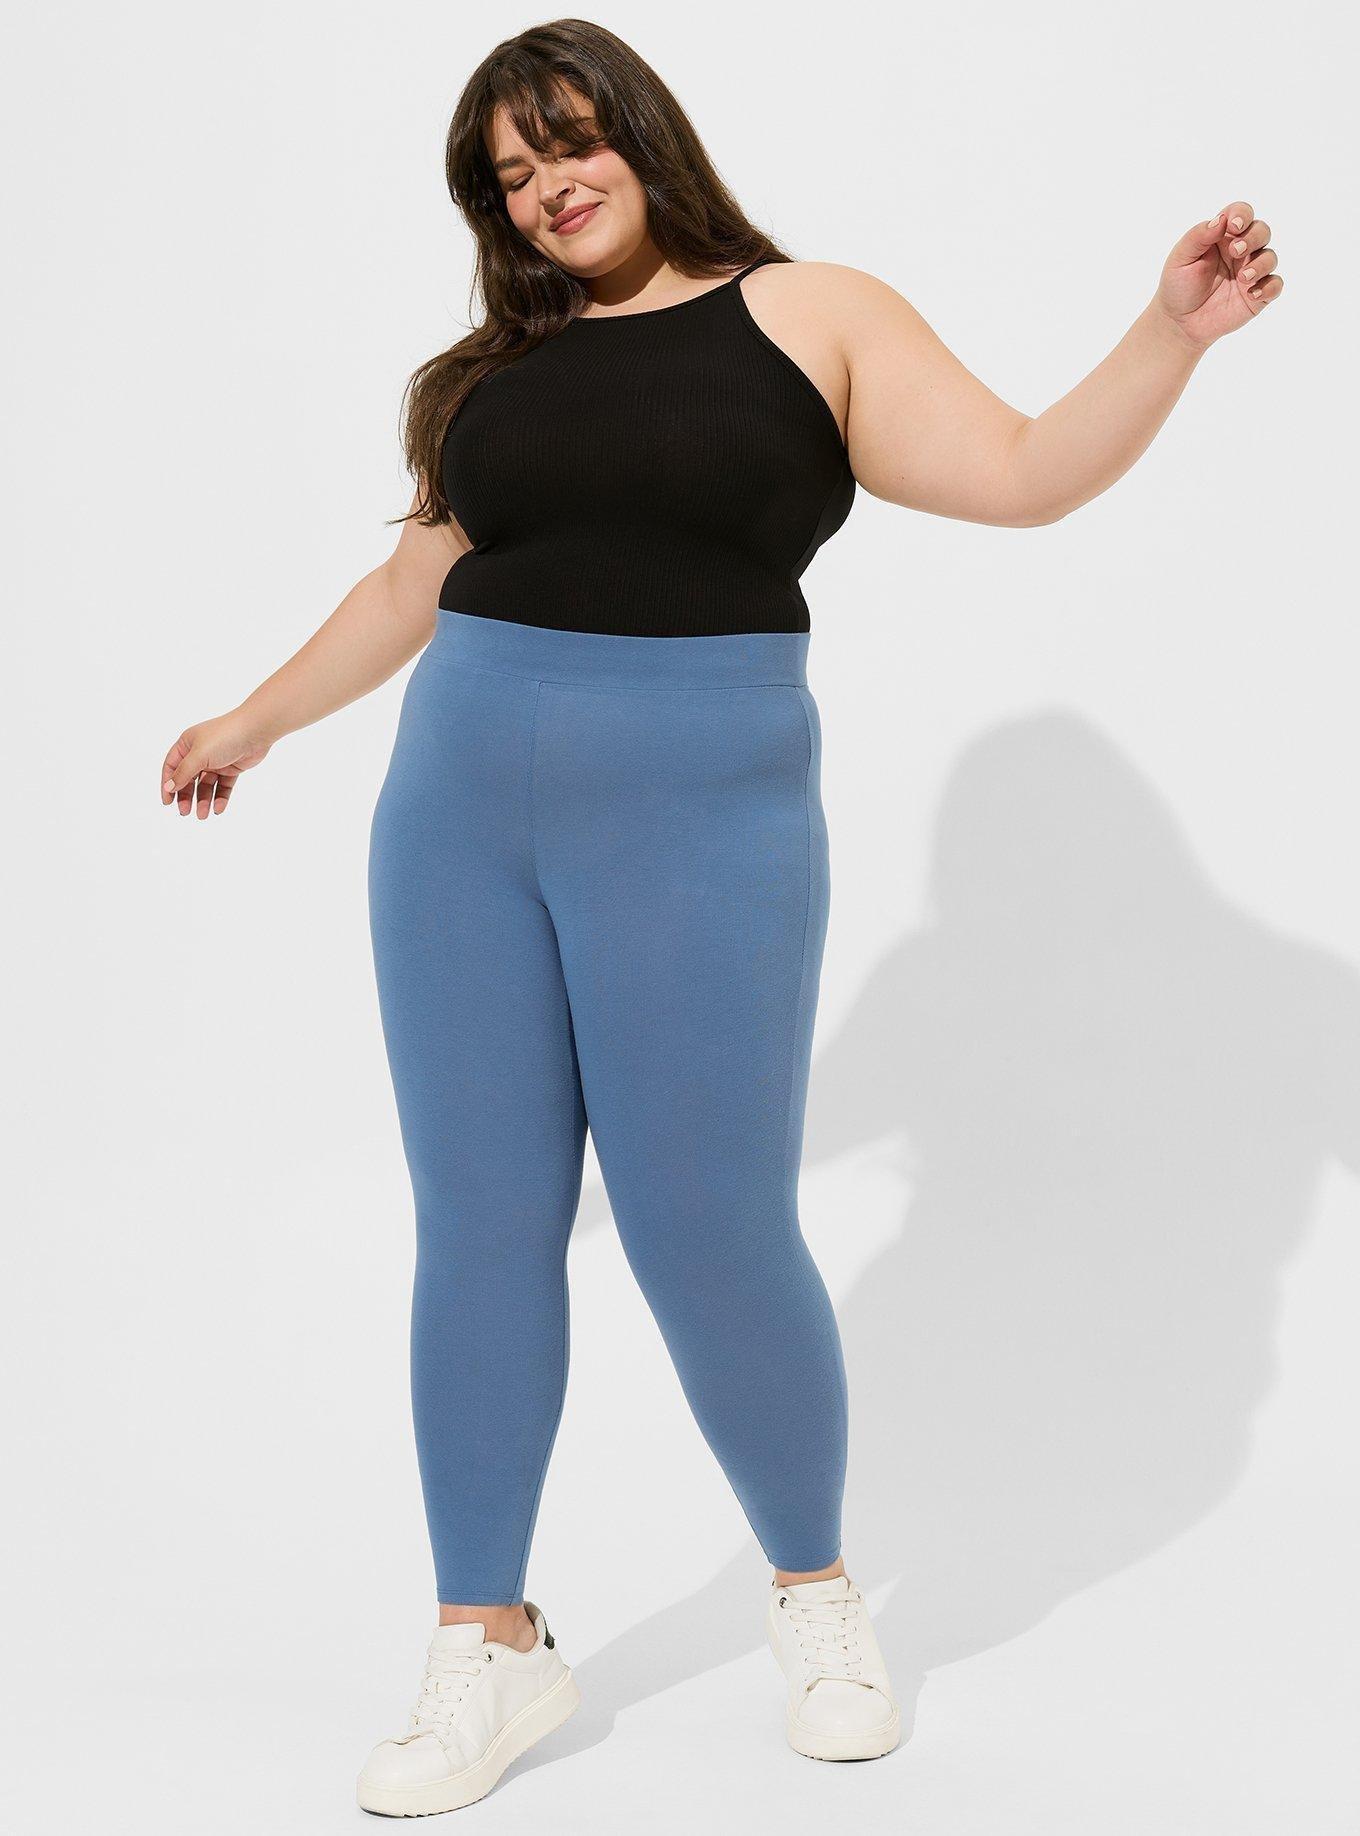 YUNAFFT Yoga Pants for Women Clearance Plus Size Women's Athletic